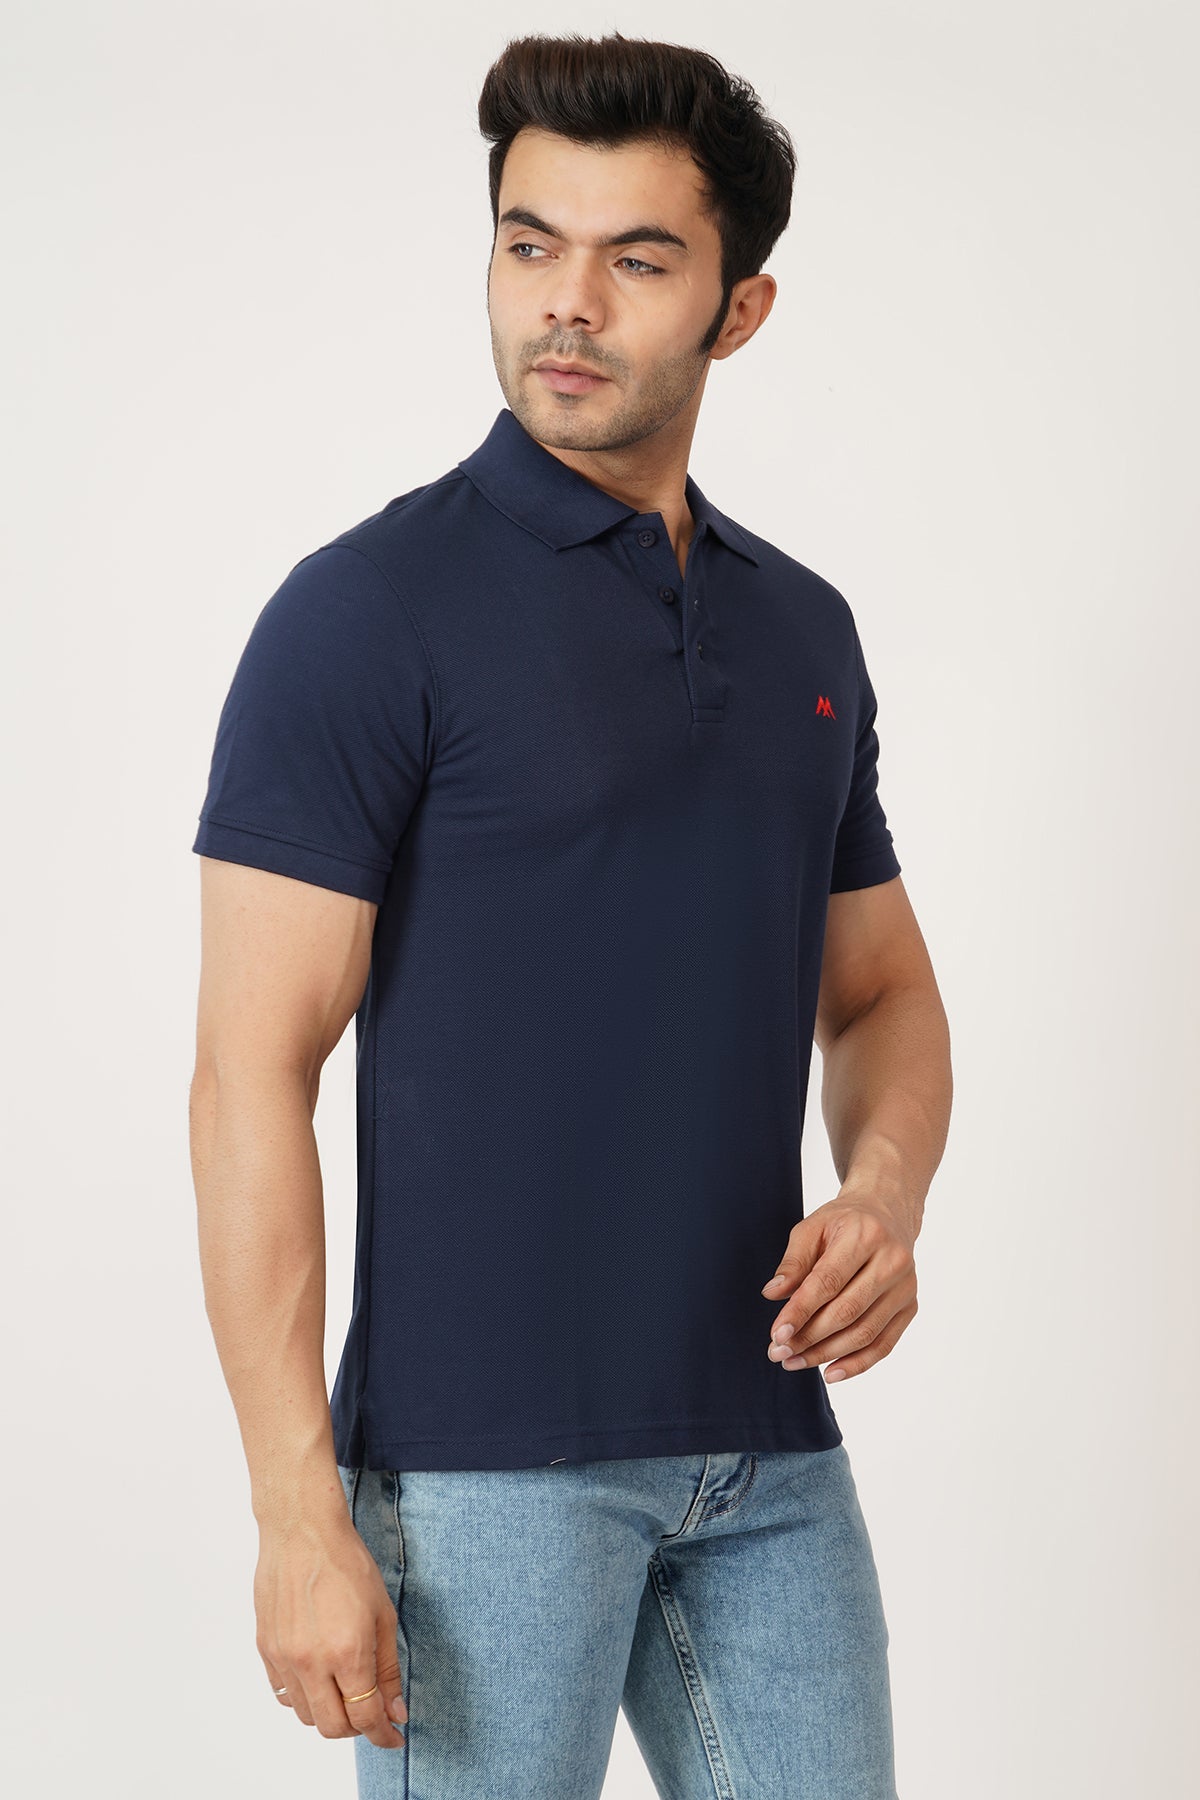 Solid Men Polo Neck Navy Blue T-Shirt